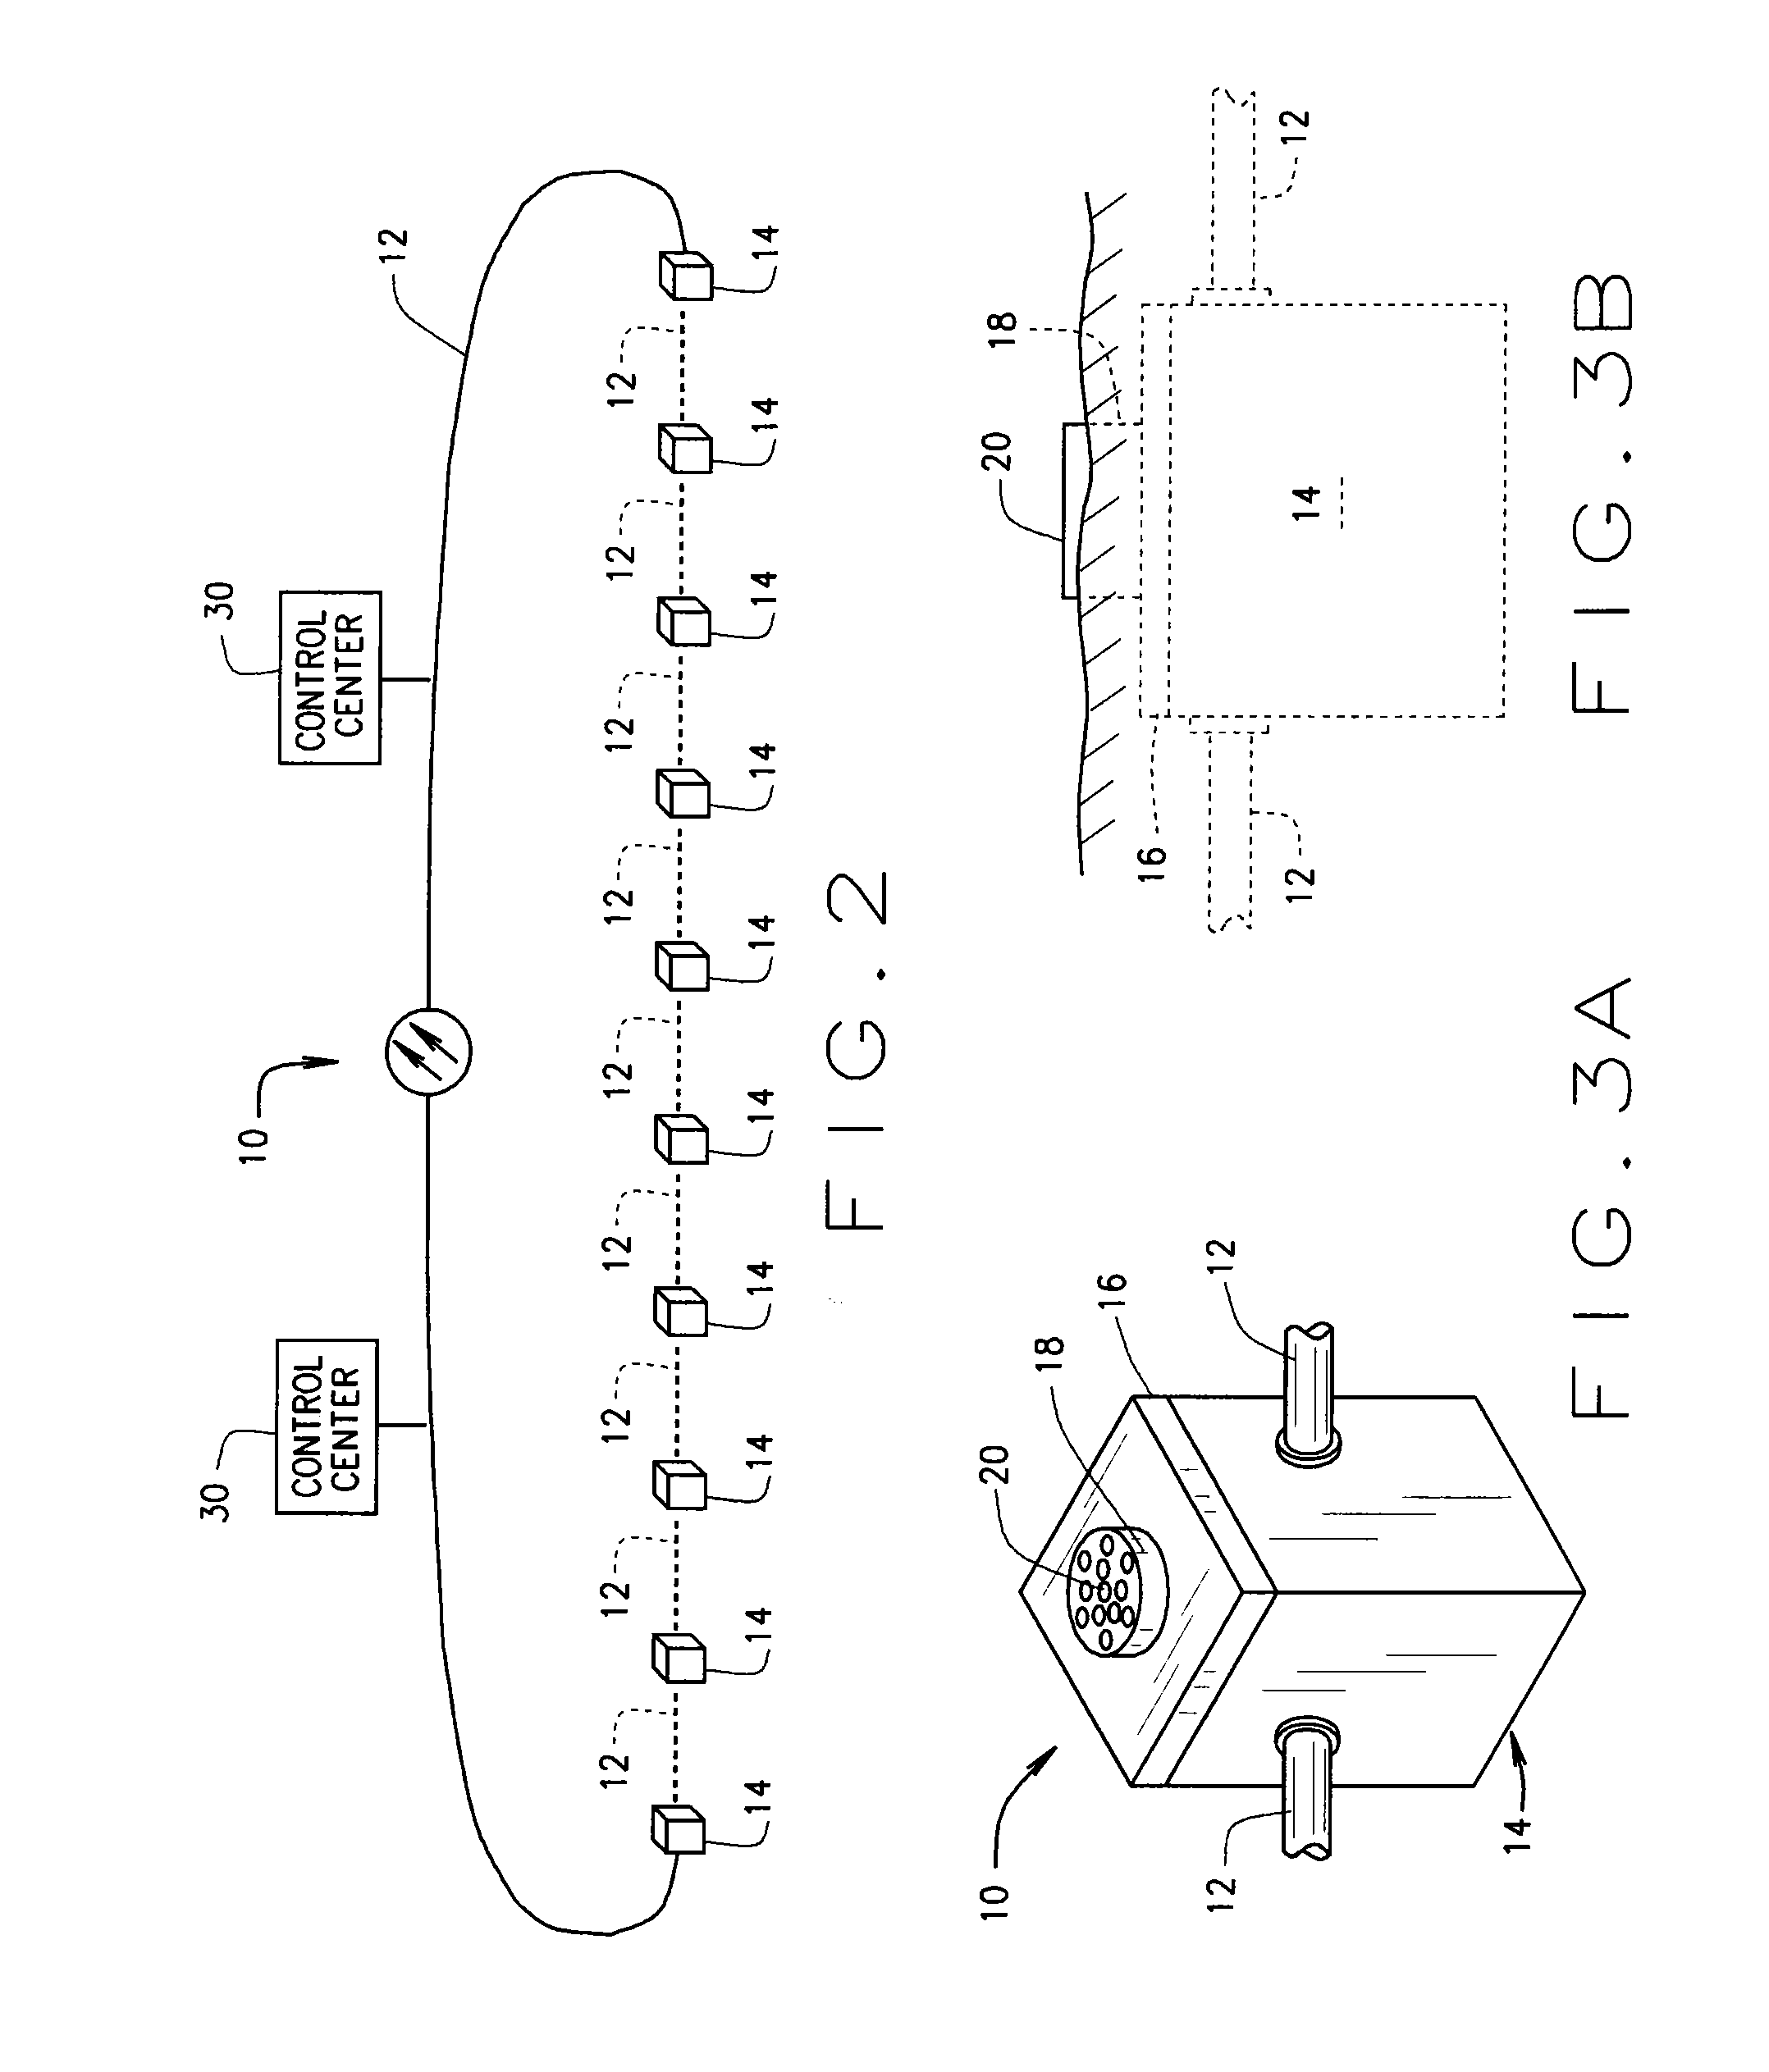 Method and system for advanced electronic border security